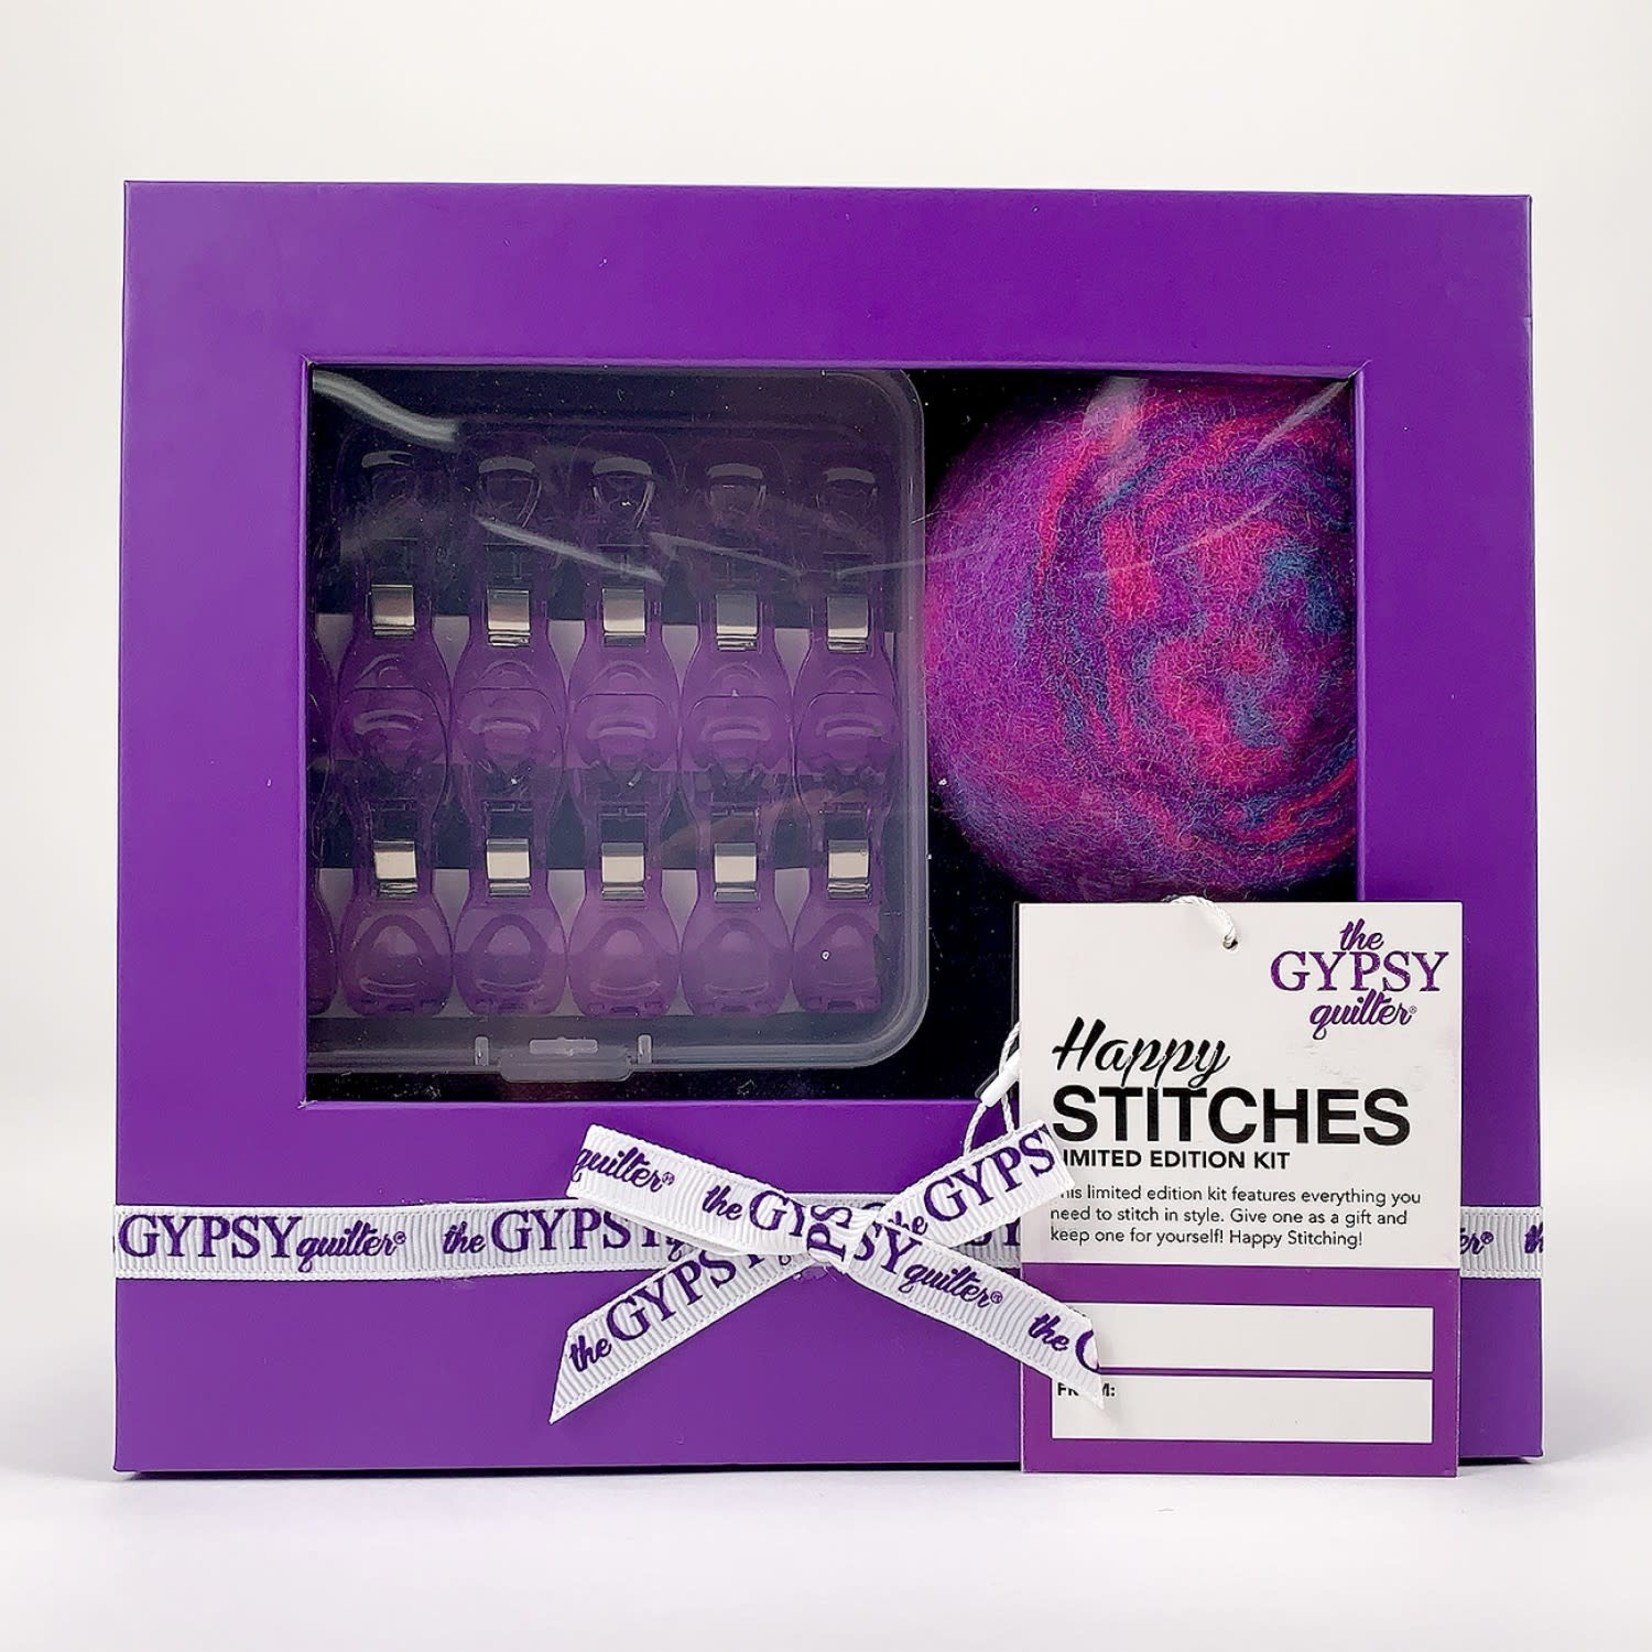 The Gypsy Quilter Happy Stitches Limited Edition Kit